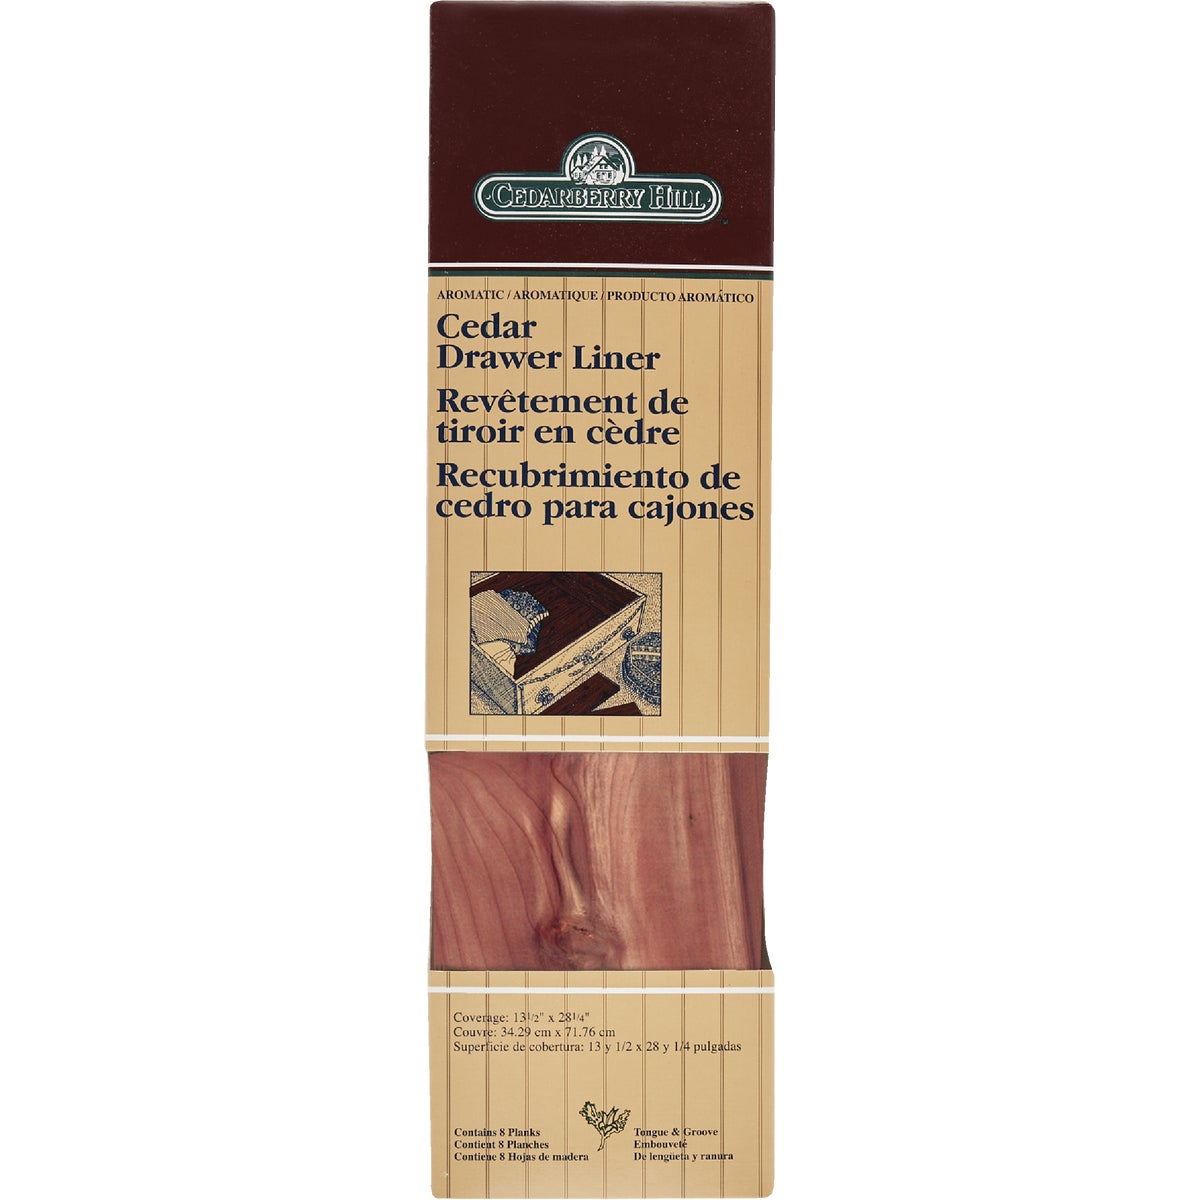 Item 634263, Solid Eastern red cedar tongue-and-groove planks are easy-to-install in 